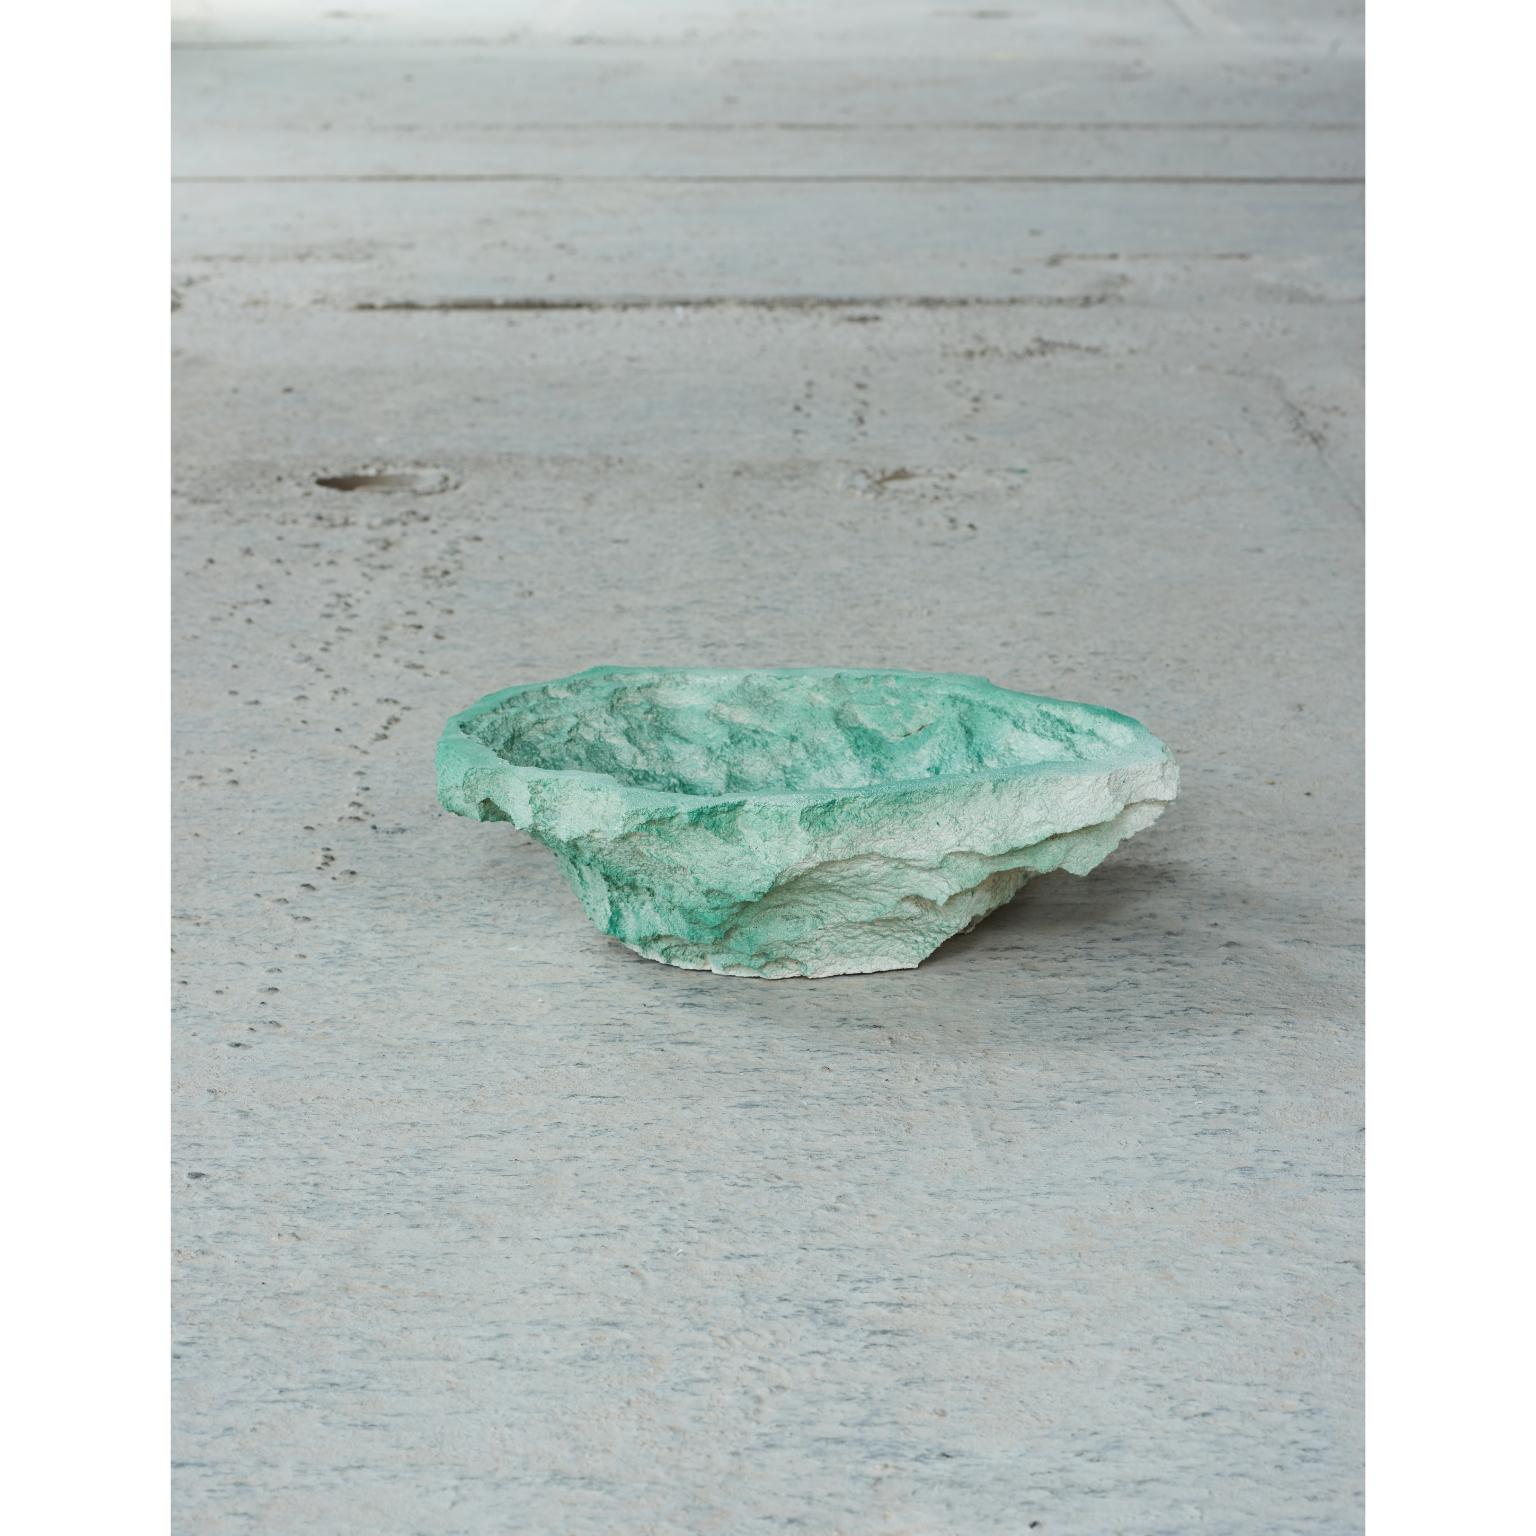 Crystal rock bowl by Andredottir & Bobek
Dimensions: W 11 x H 27 cm
Materials: Reused Foam/mattress and Jesmontite Hardner in Color Green Fade

Artificial Nature is a collaboration between the artist and design duo Josephine Andredottir and